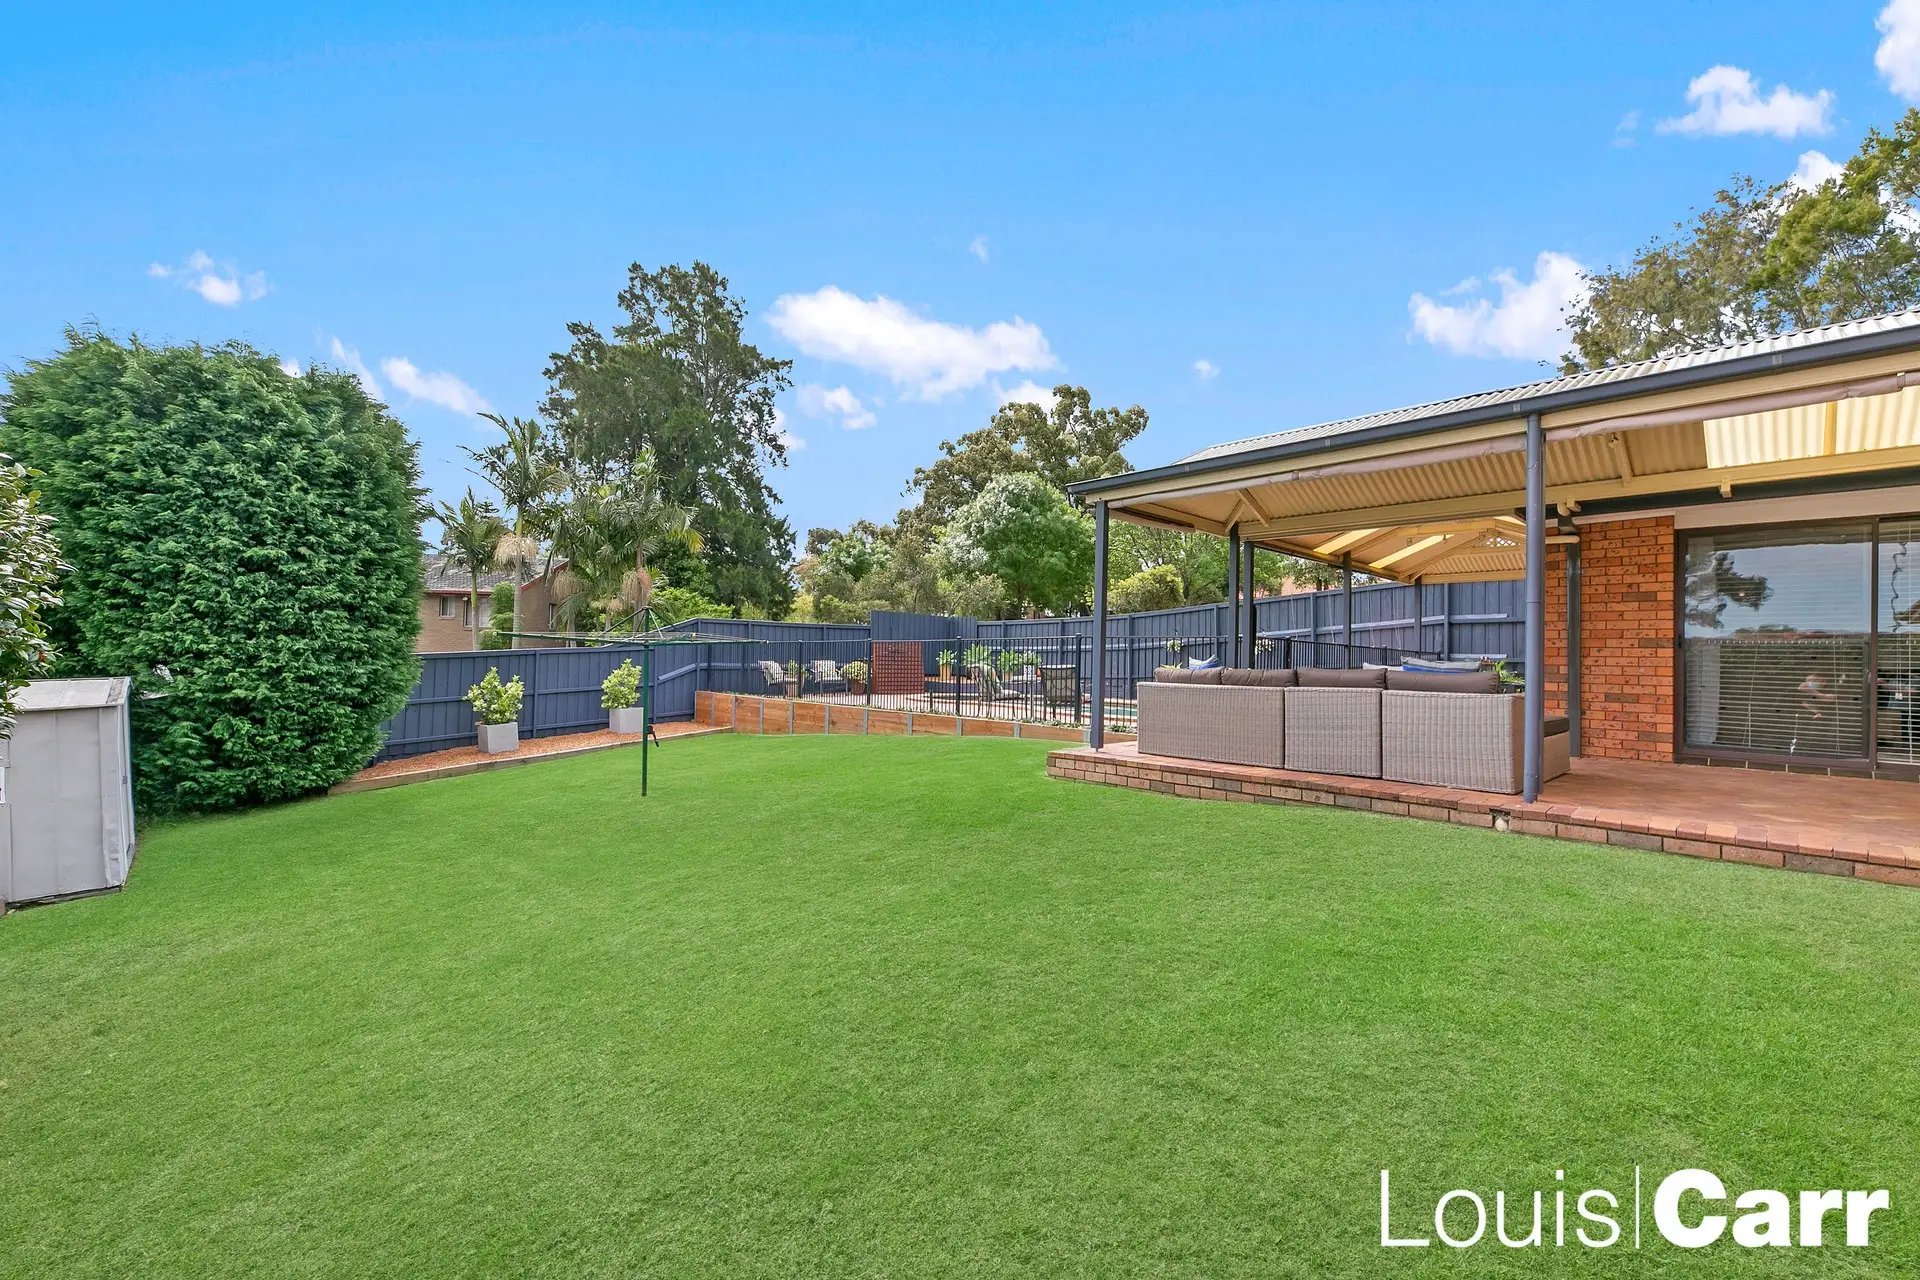 Photo #7: 82 Gooraway Drive, Castle Hill - Sold by Louis Carr Real Estate